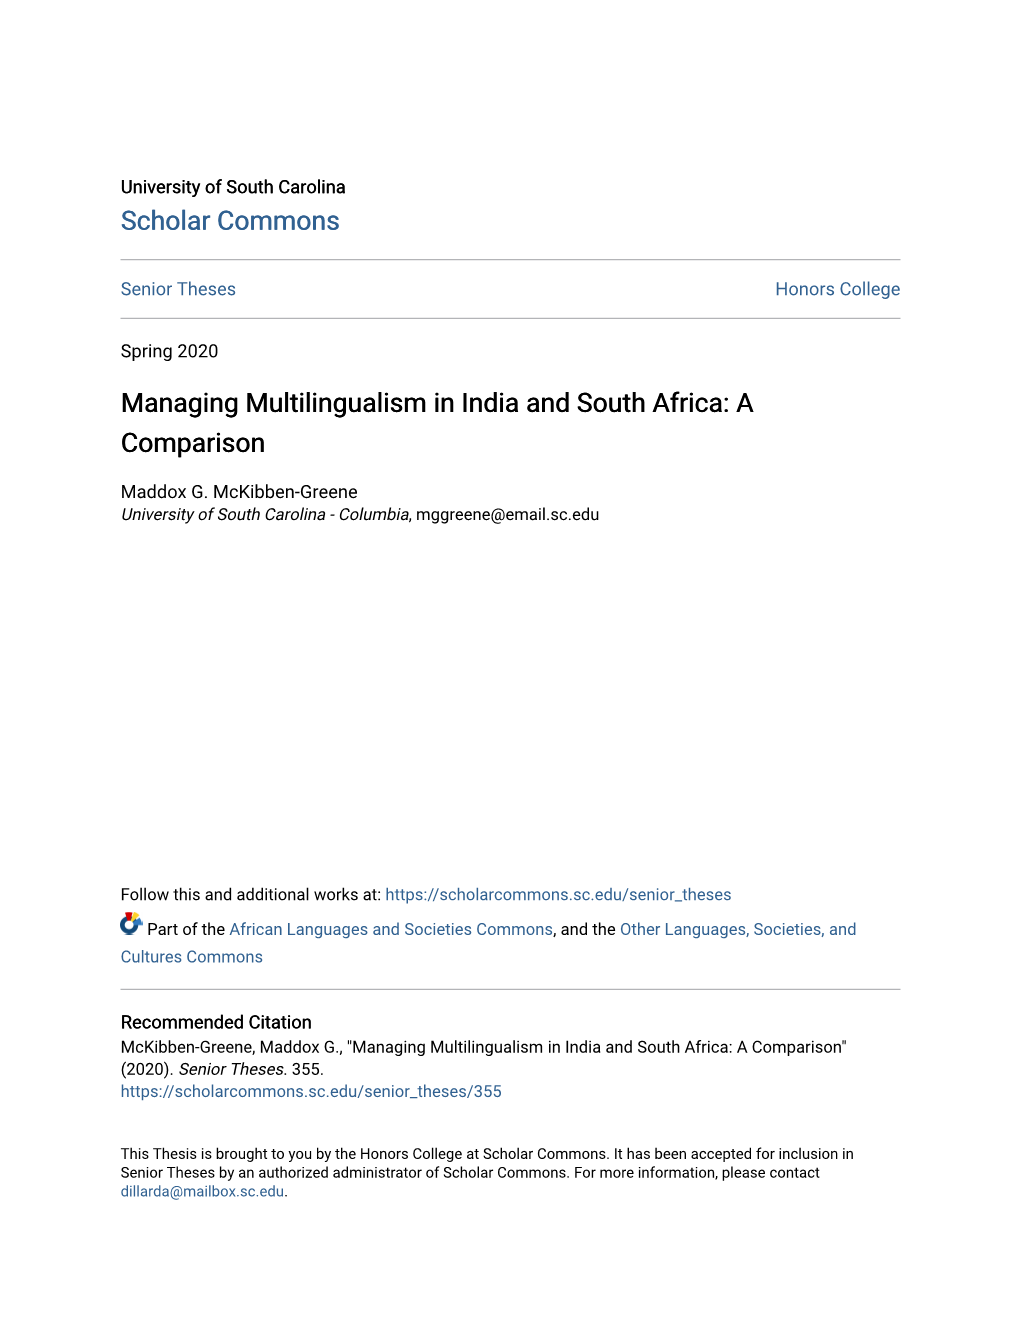 Managing Multilingualism in India and South Africa: a Comparison